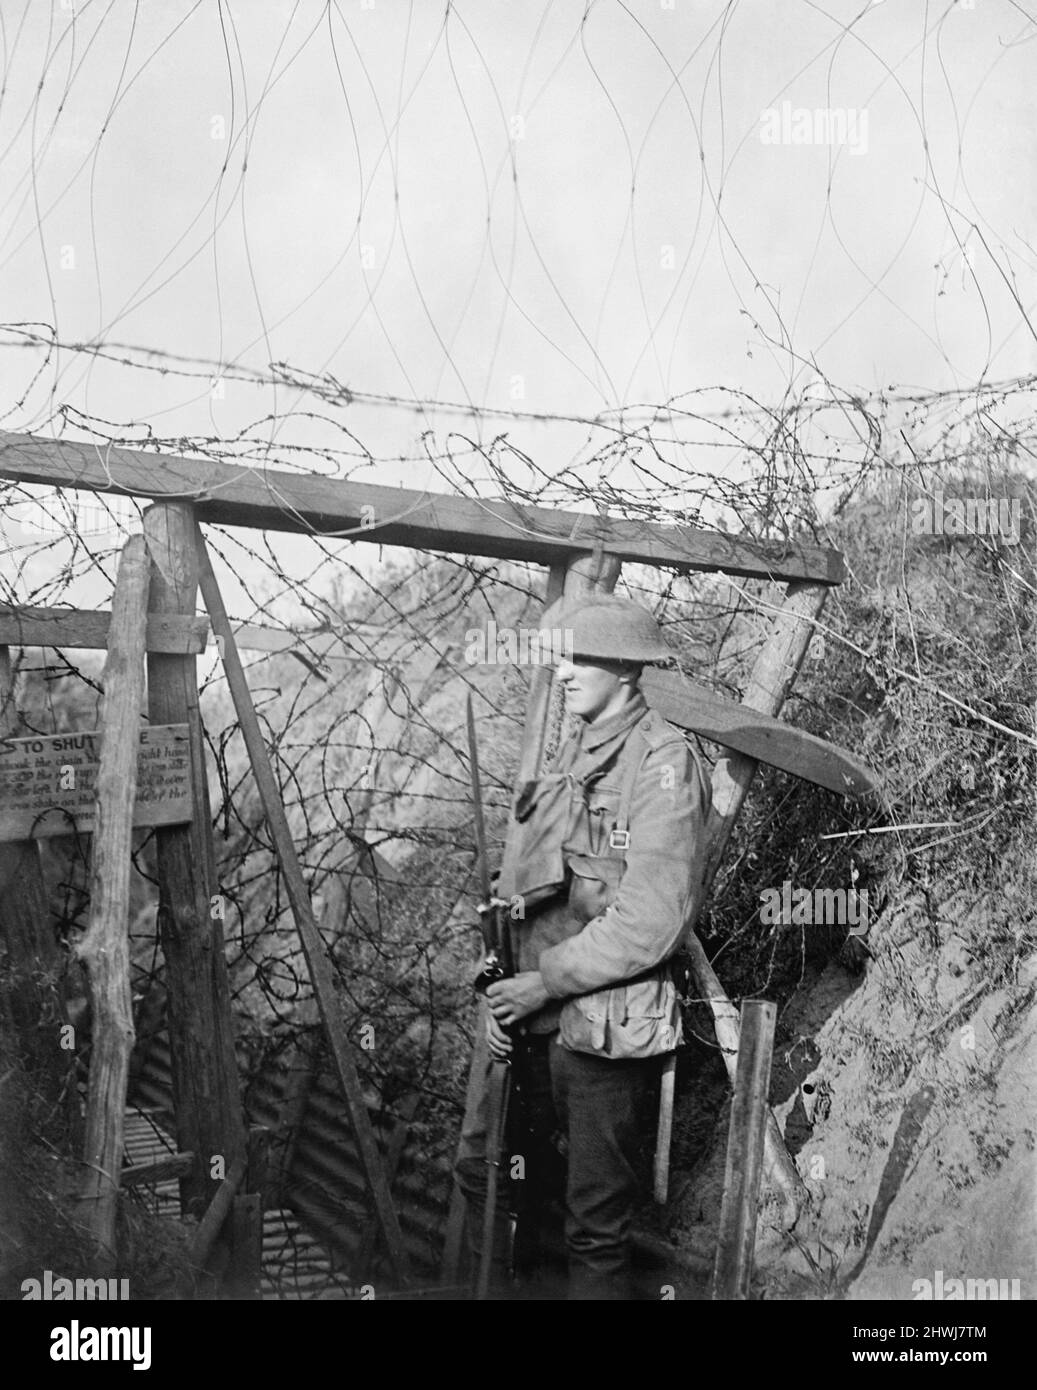 A barbed wire gate in a trench system to form a block against raiders at Cambrin in trenches held by 1/7th Sherwood Foresters (Nottinghamshire & Derbyshire Regiment), 16 September 1917. Stock Photo